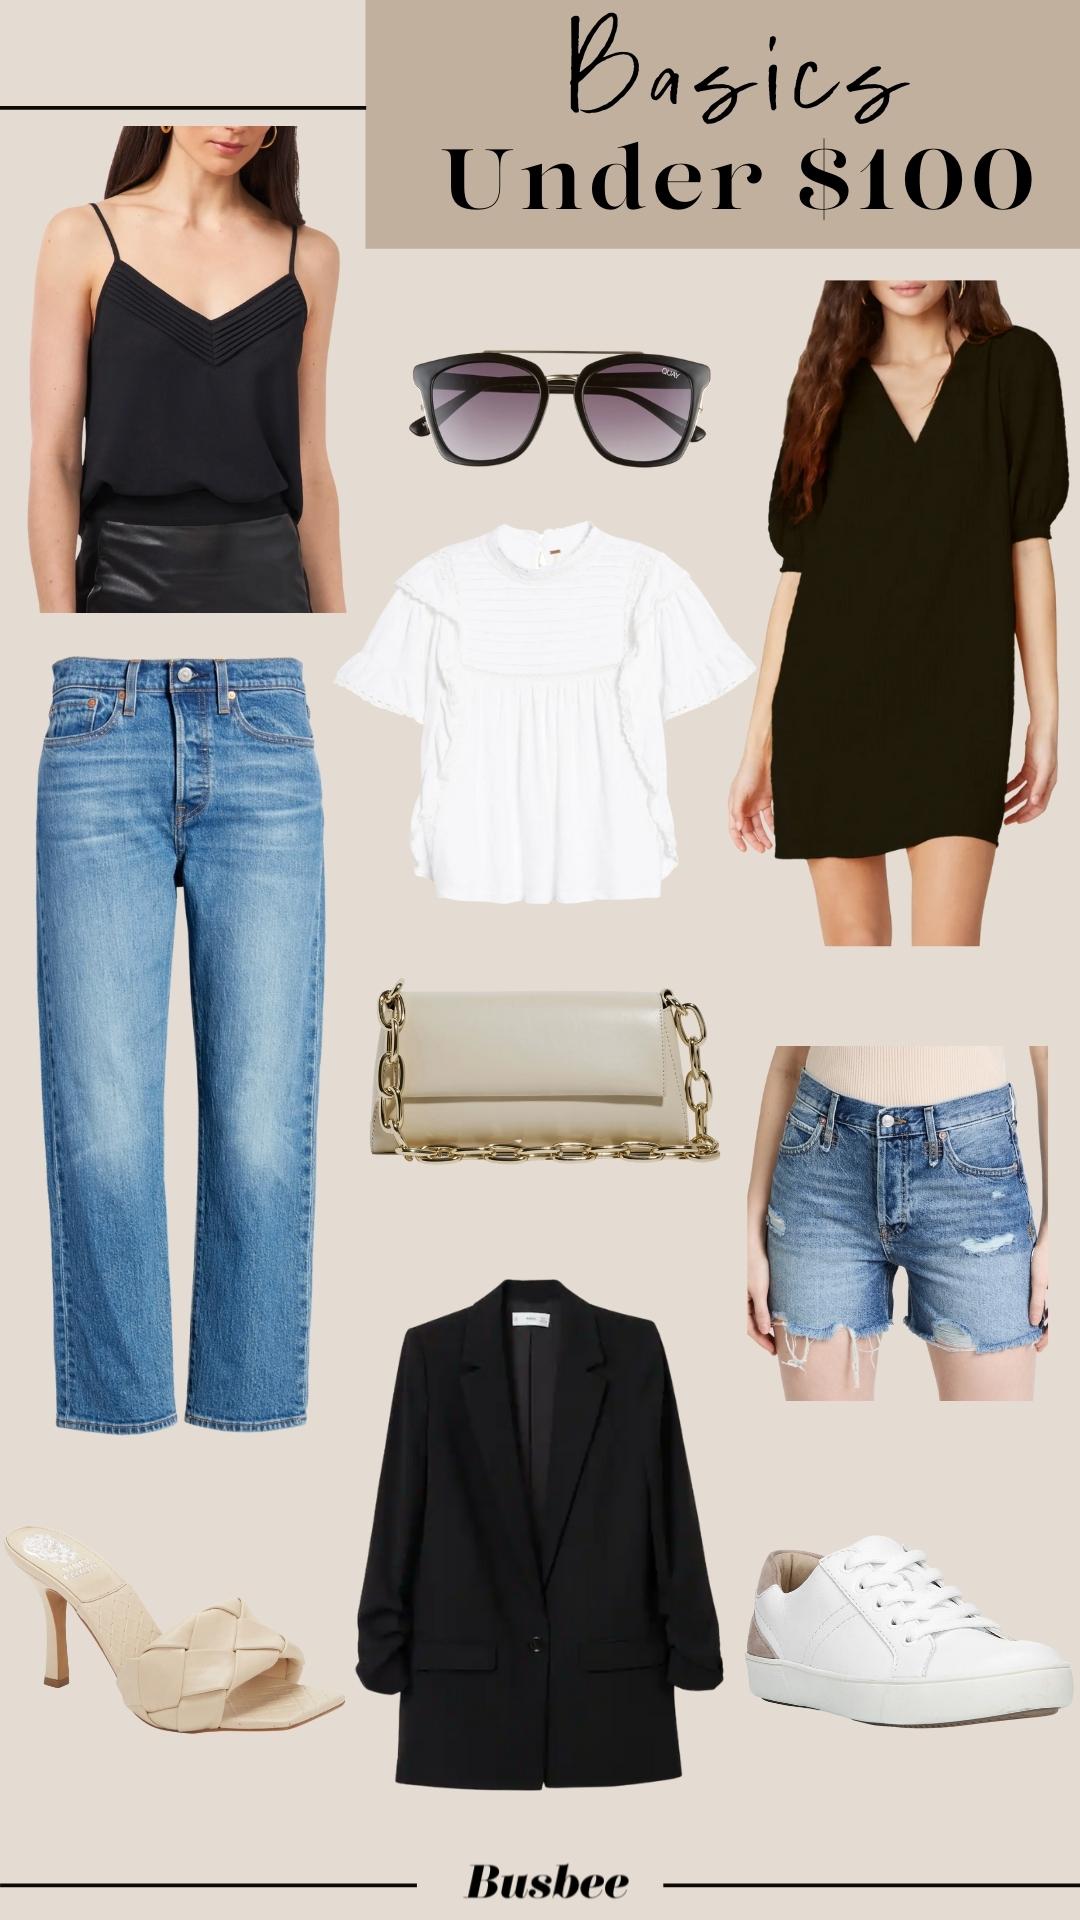 affordable basics, basics on a budget, how to build a wardrobe on a budget, wardrobe basics on a budget, wardrobe basics checklist, affordable wardrobe basics, erin busbee, busbee style, wardrobe basics under $100